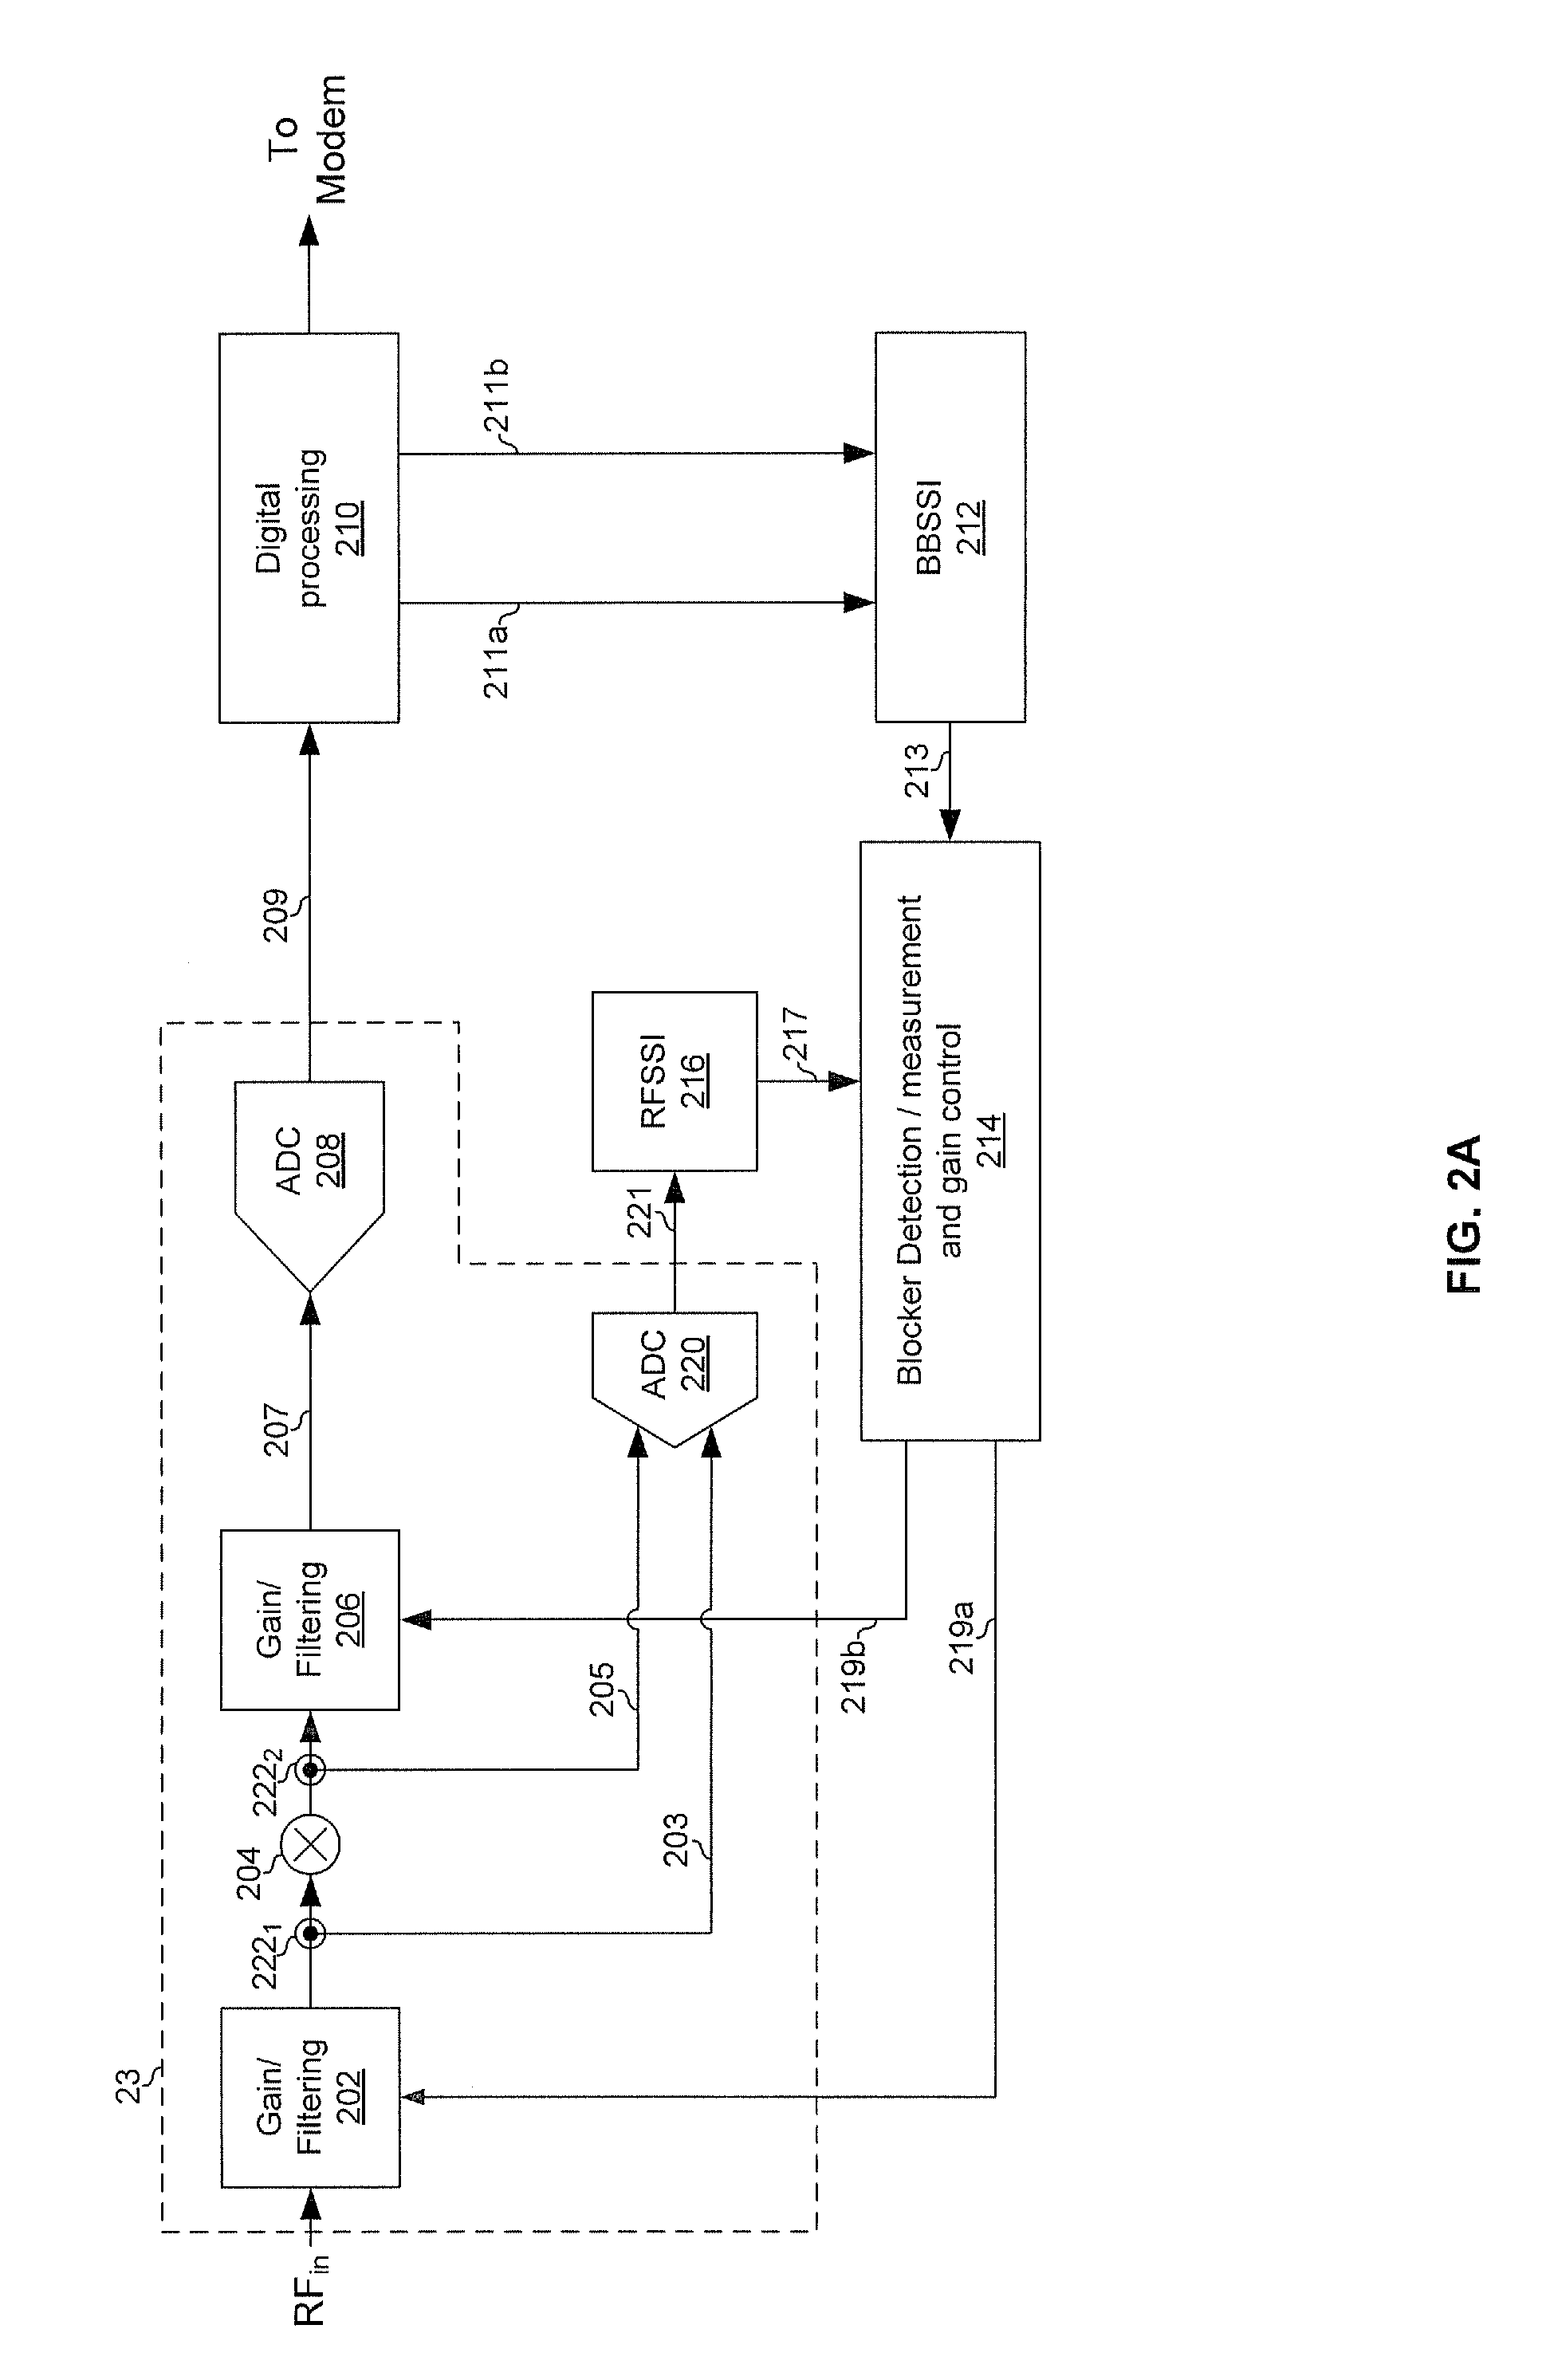 Method and system for blocker detecton and automatic gain control